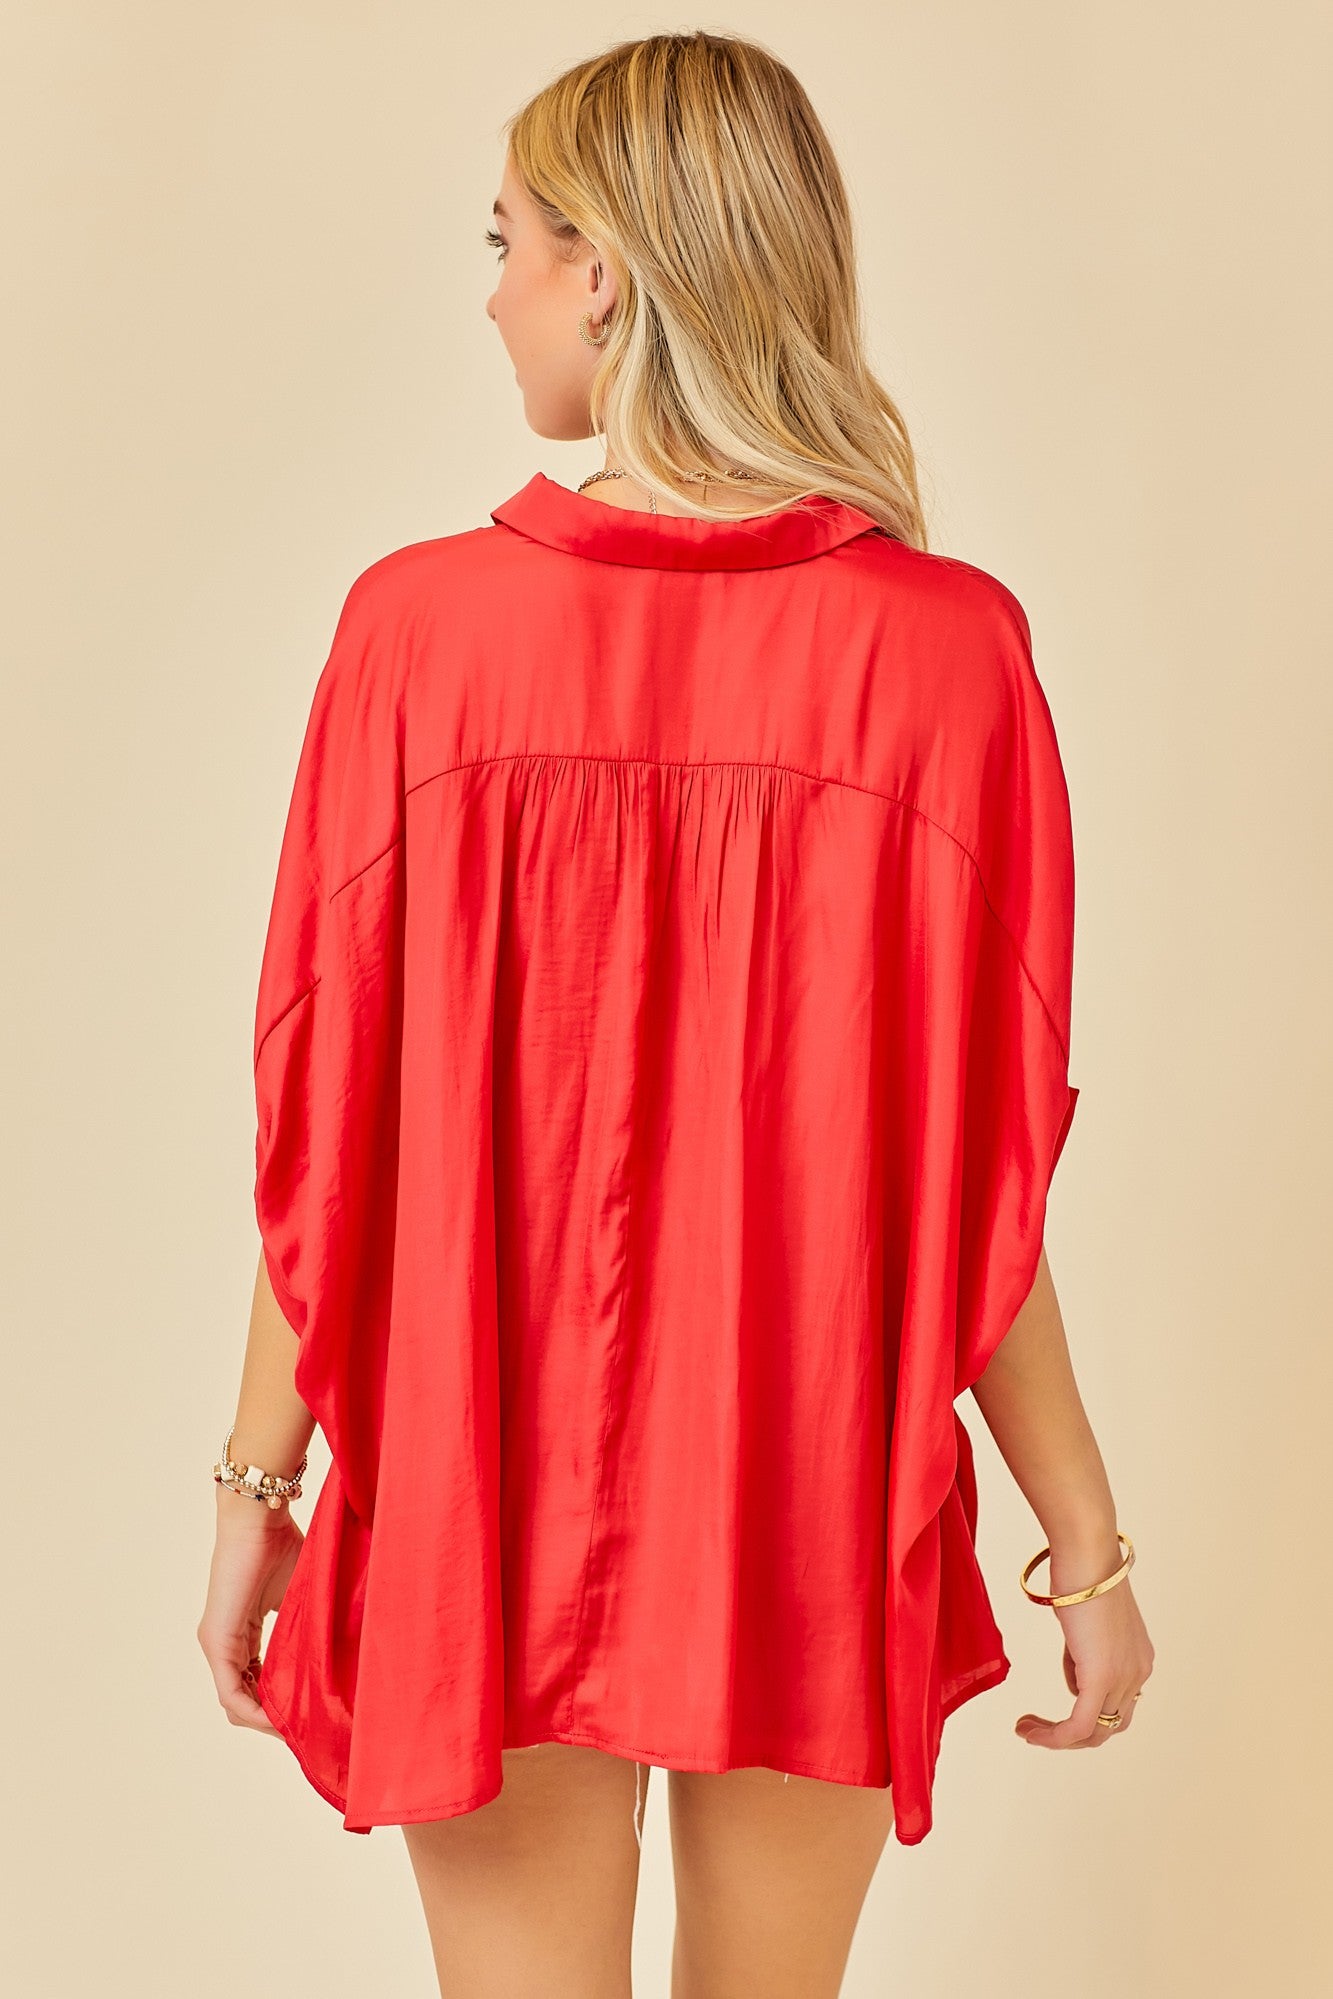 Satin Red Oversized blouse